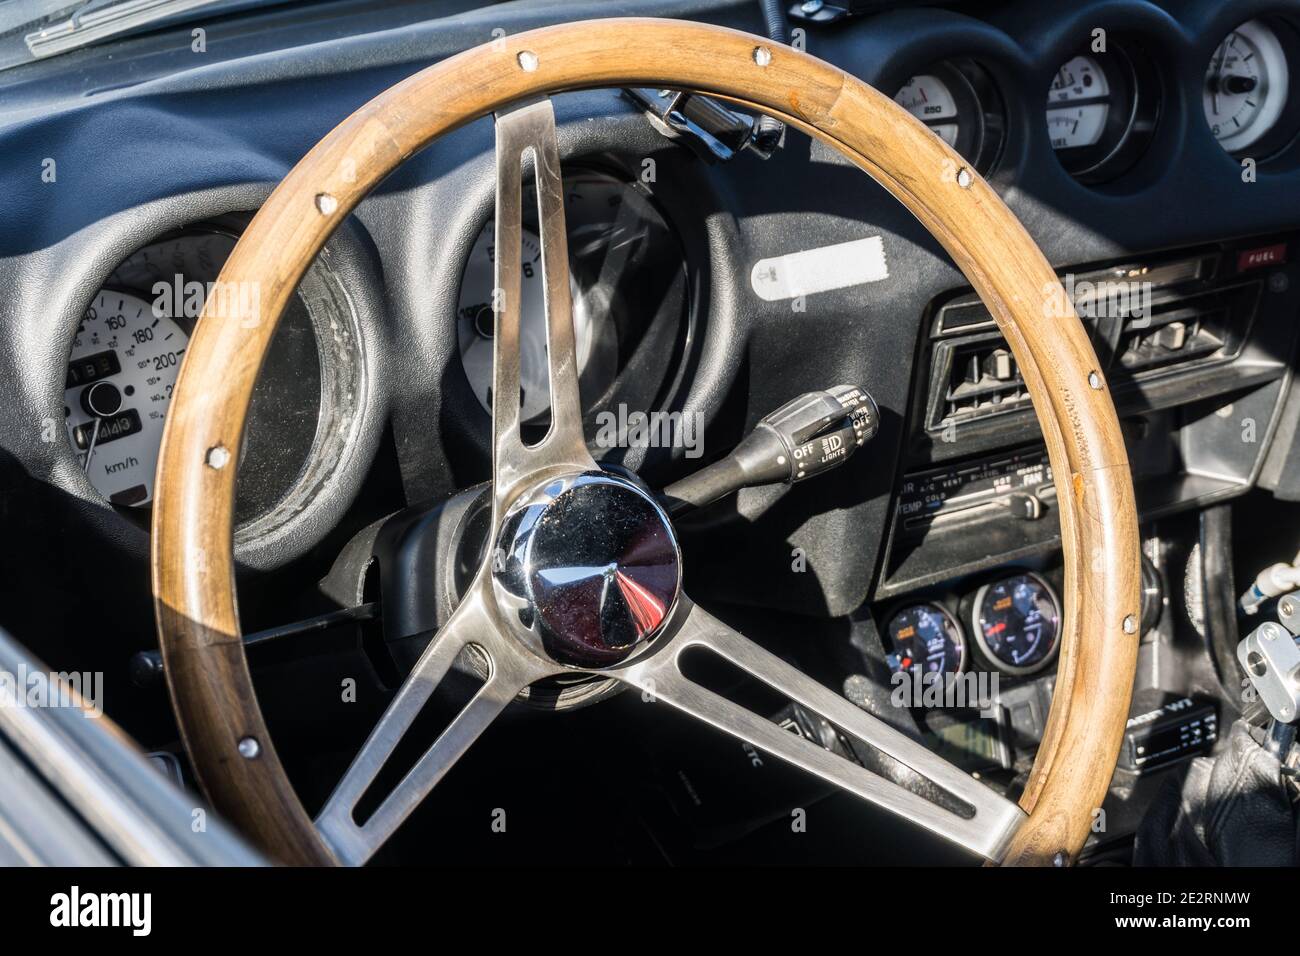 Close up detail of the steering wheel and dashboard of a matte black customised Datsun Fairlady 280Z GT coupe 1970s sports car Stock Photo